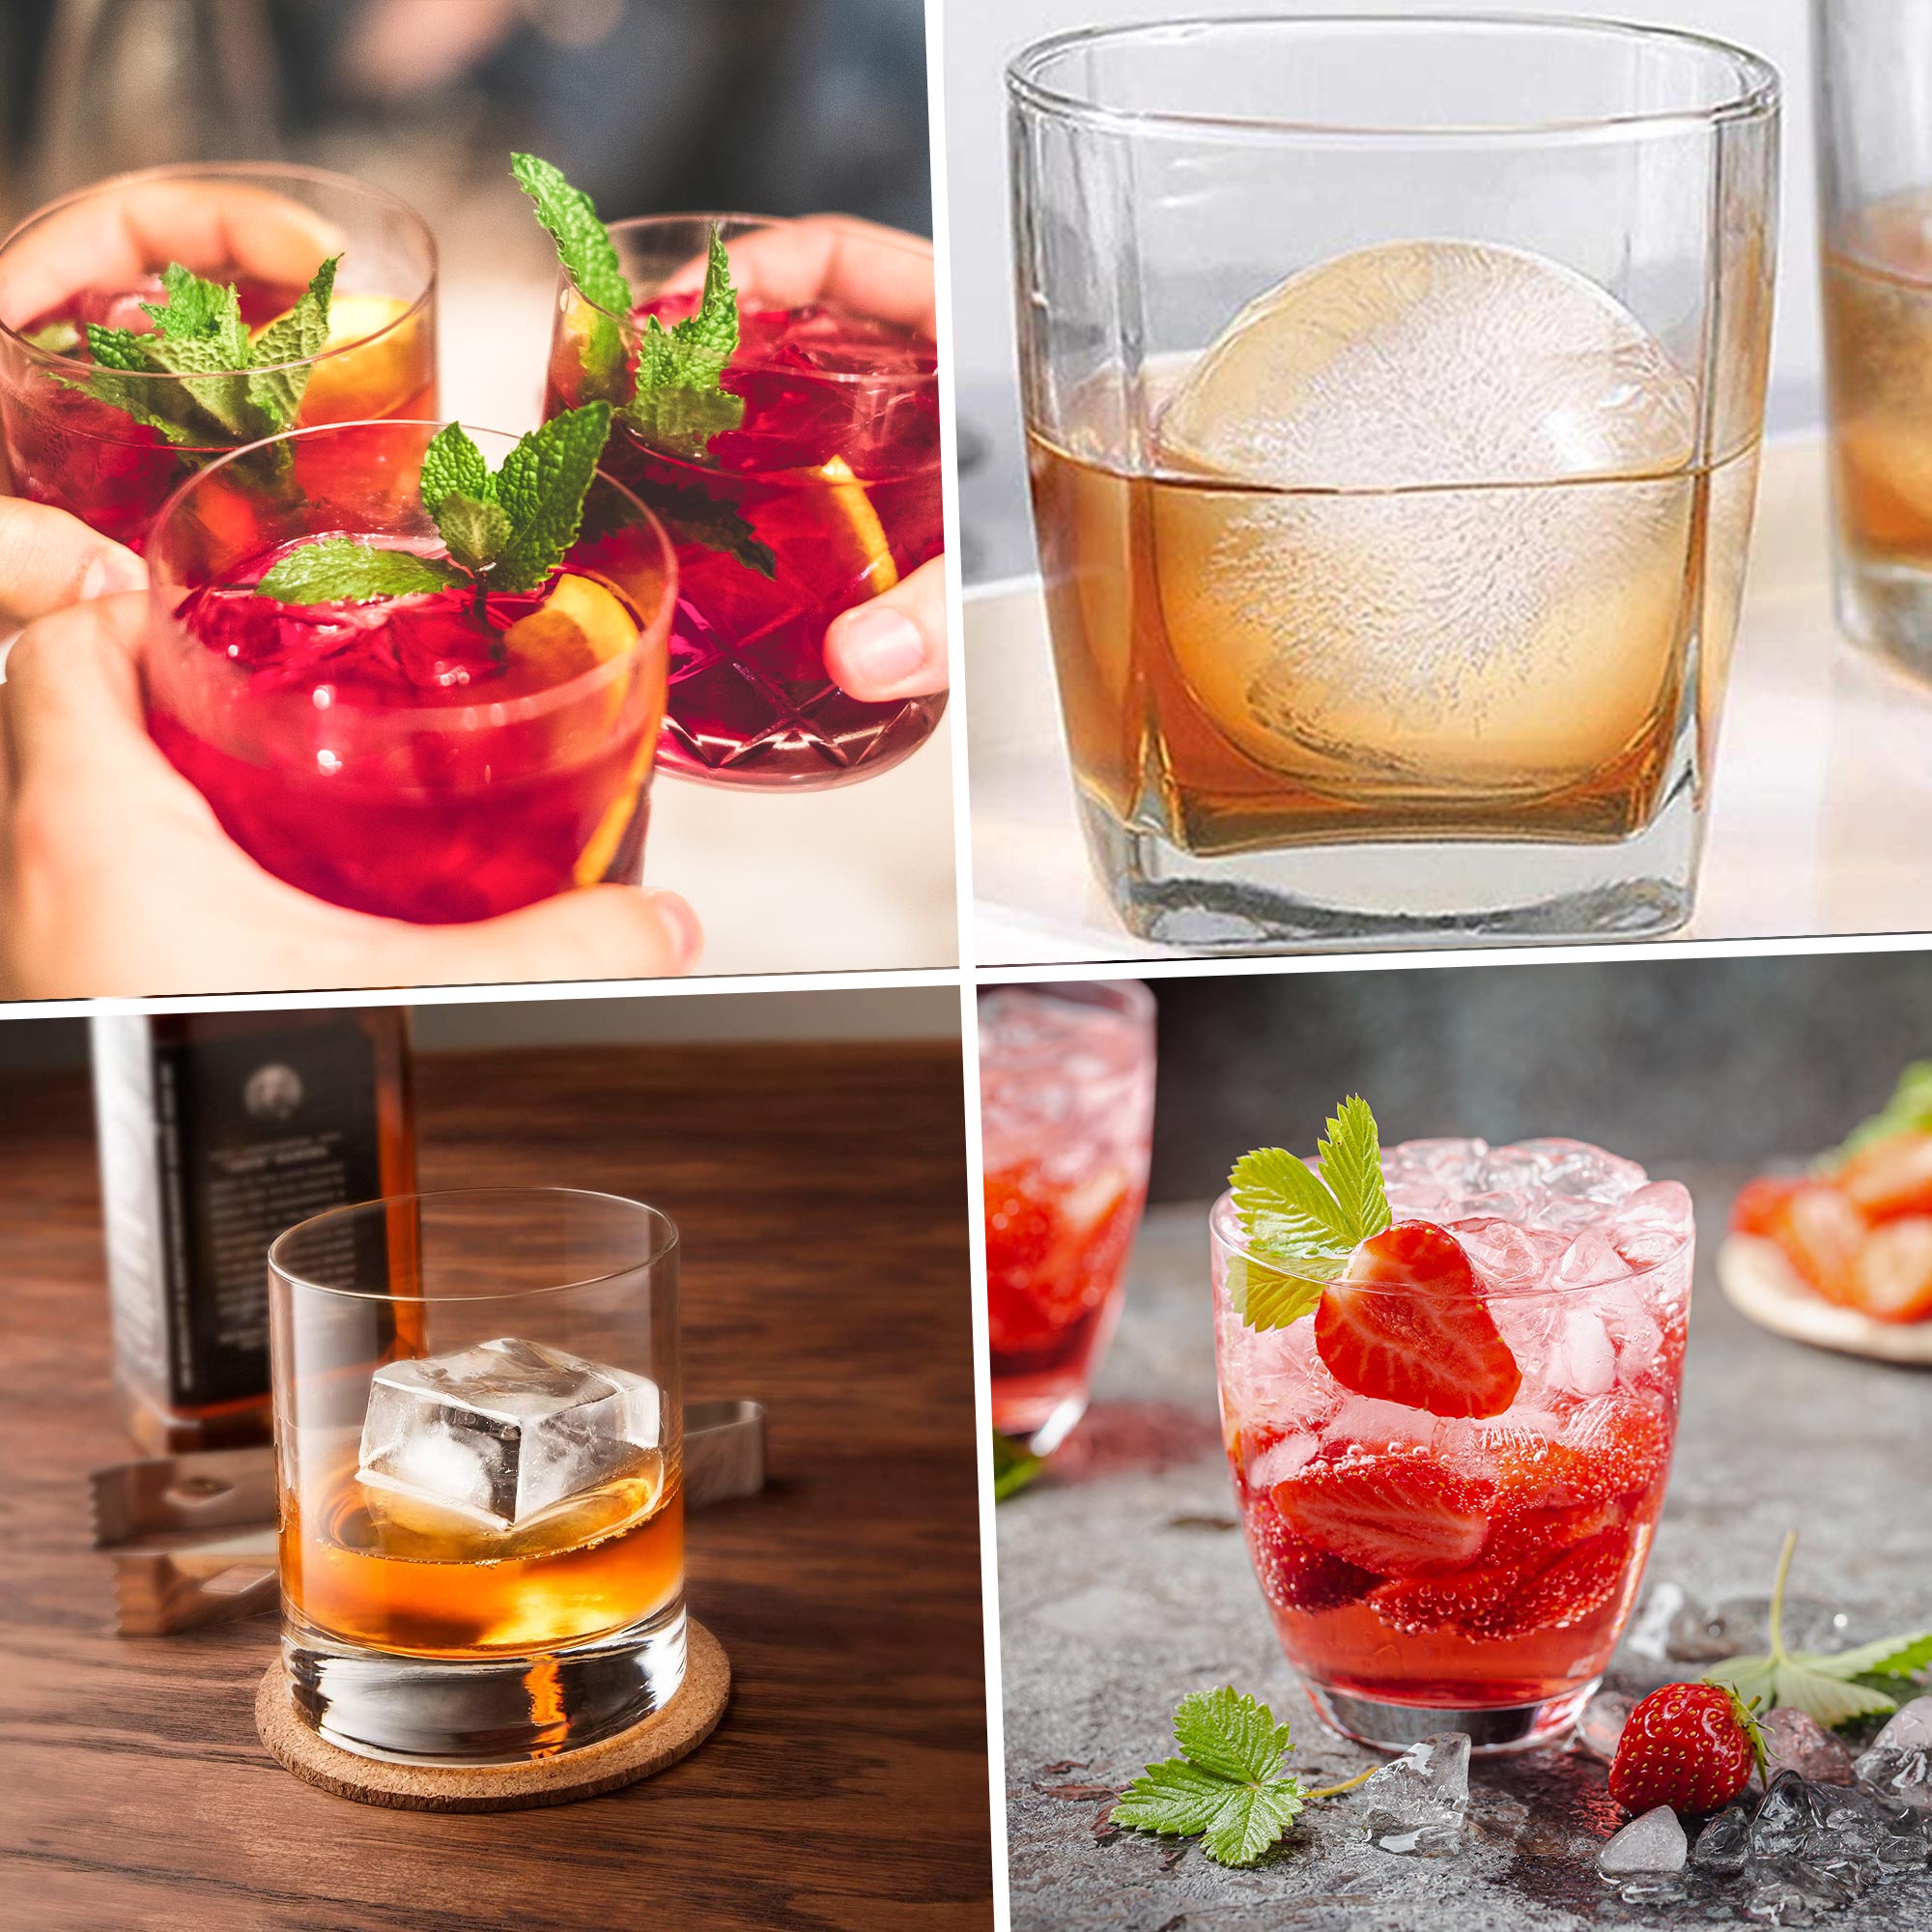 Ice Cube Trays, Large Square & Round Ice Cubes - Melt Slowly To Keep Whisky  & Drinks Cool Longer And Fresher - Easy To Release - Premium Silicone Ice